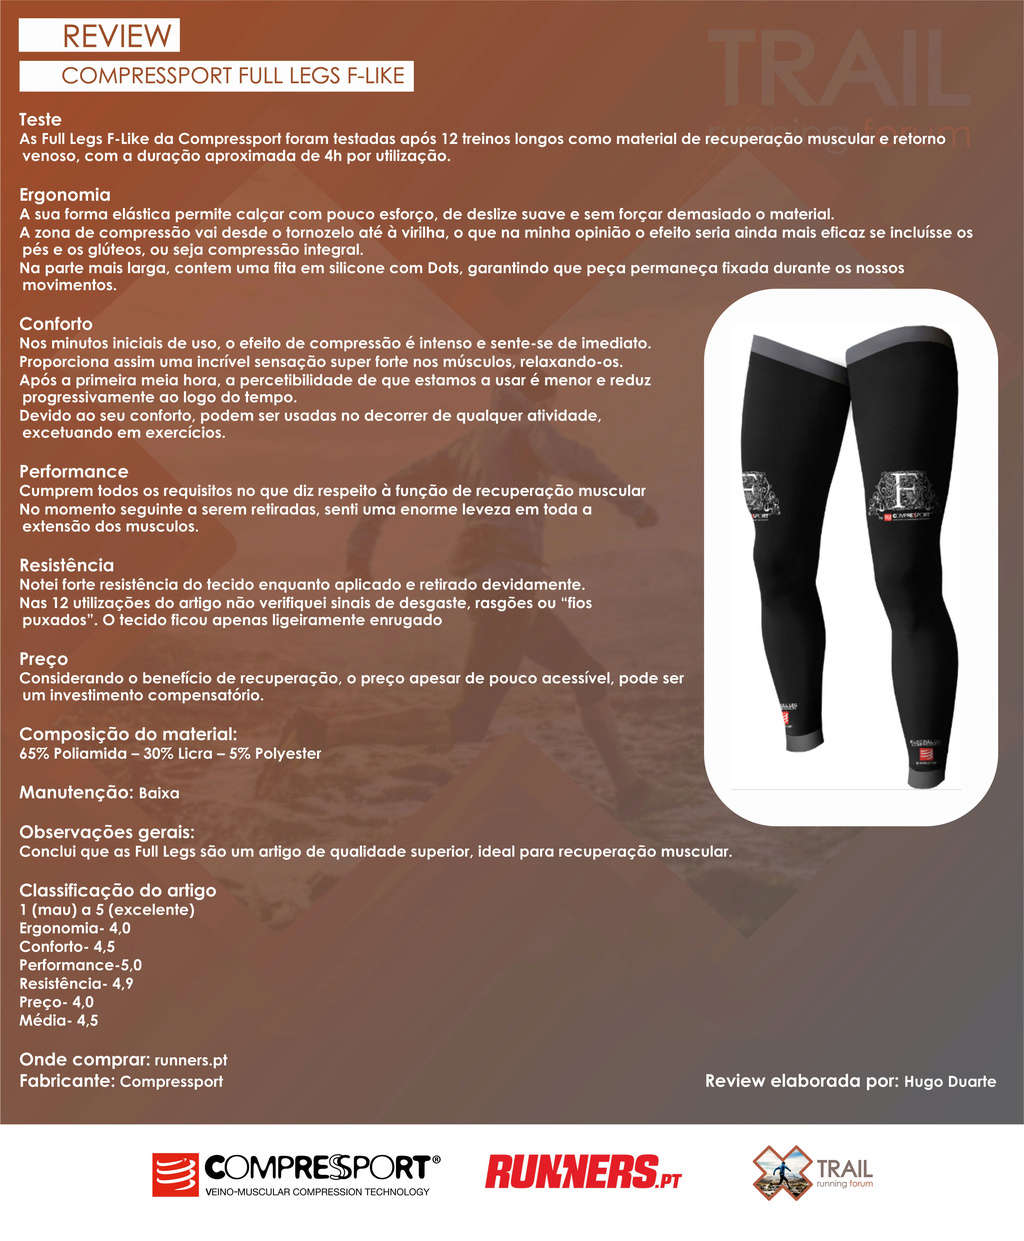 [Review] Compressport Full Legs F-Like Review19